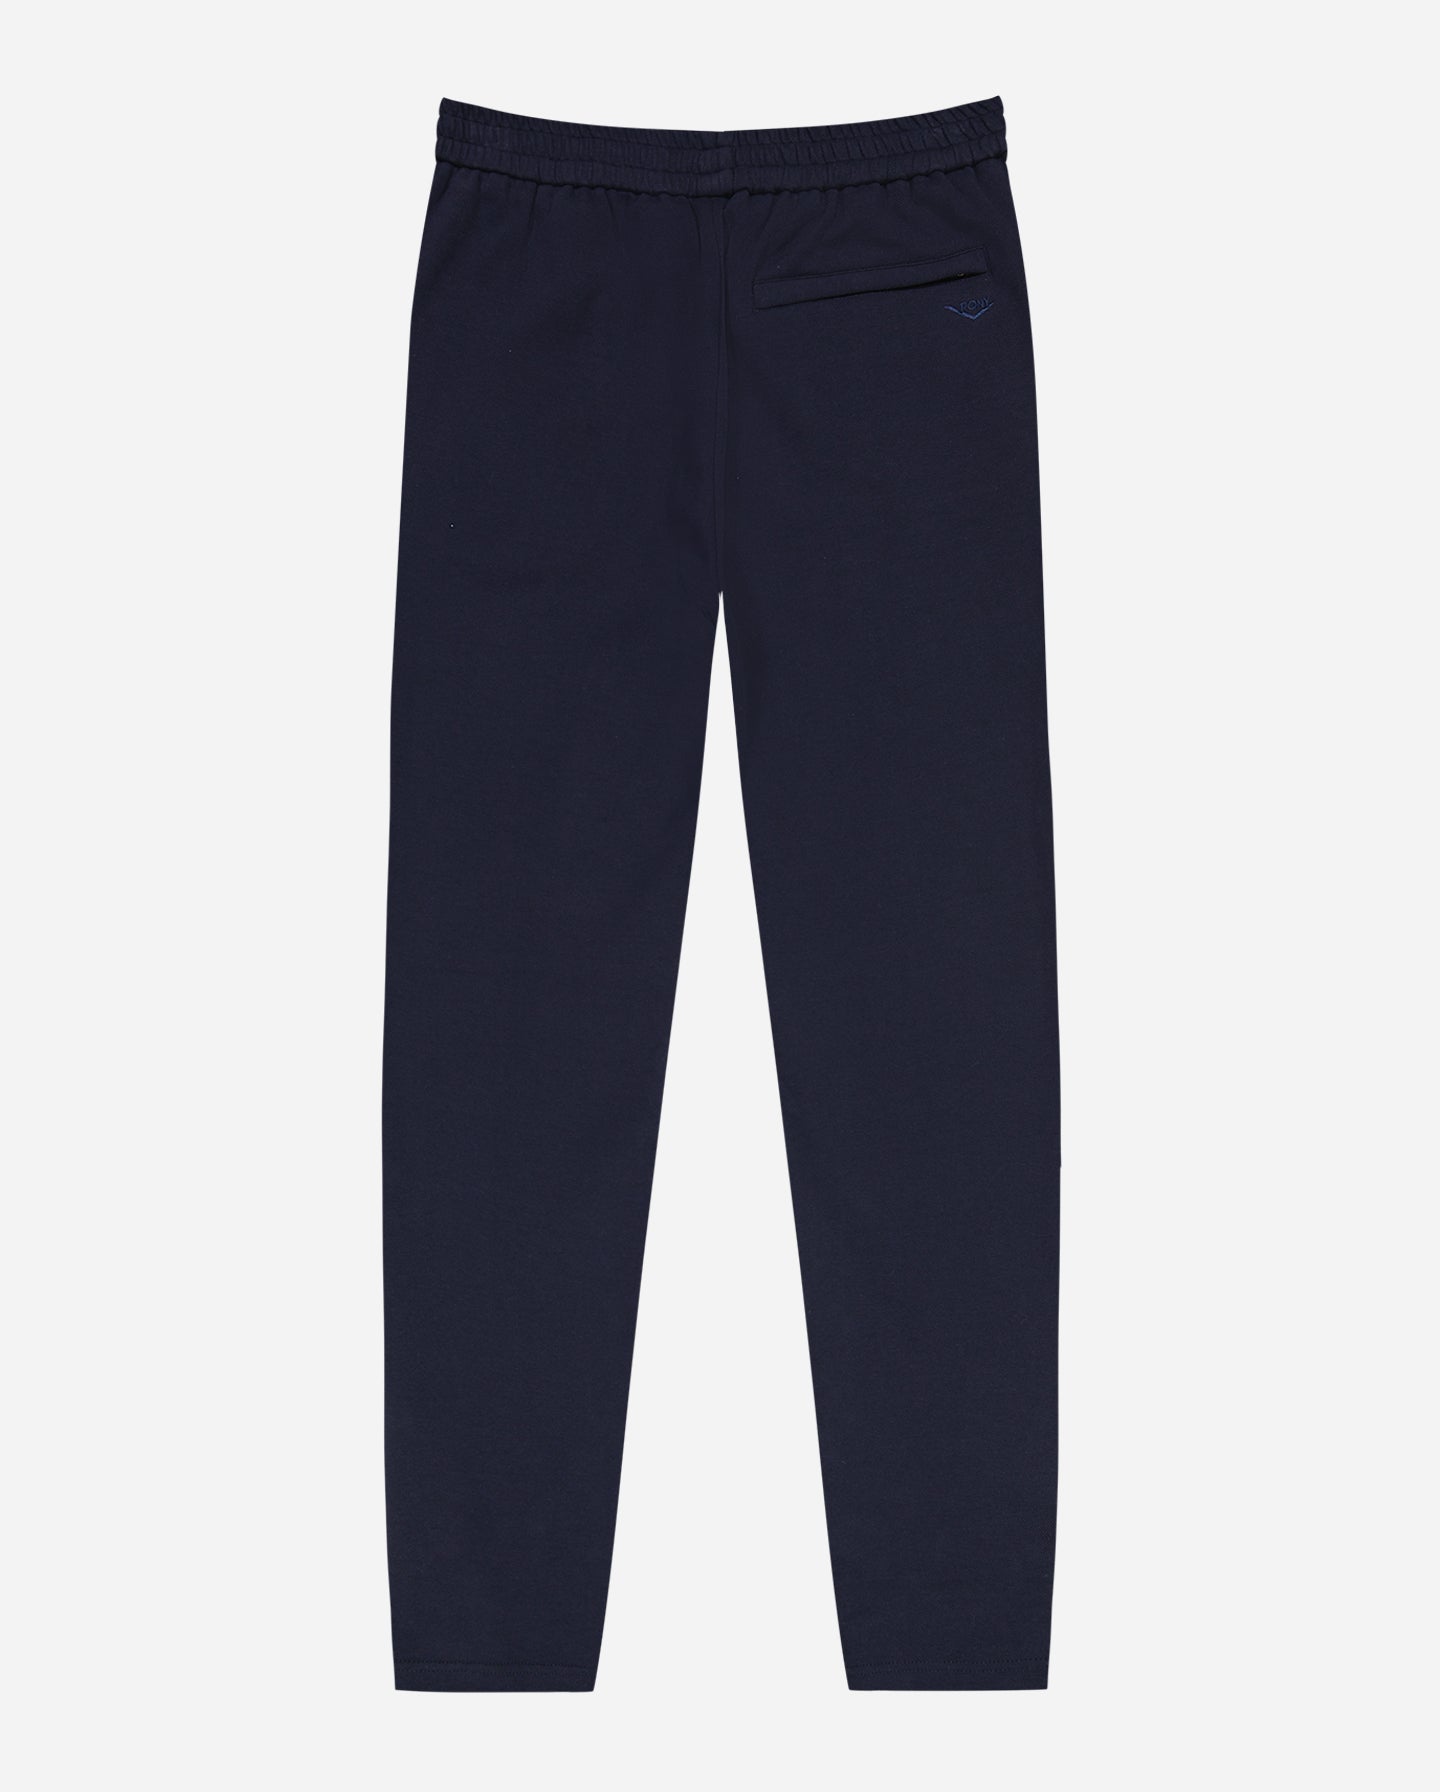 NAVY TRACK PANT